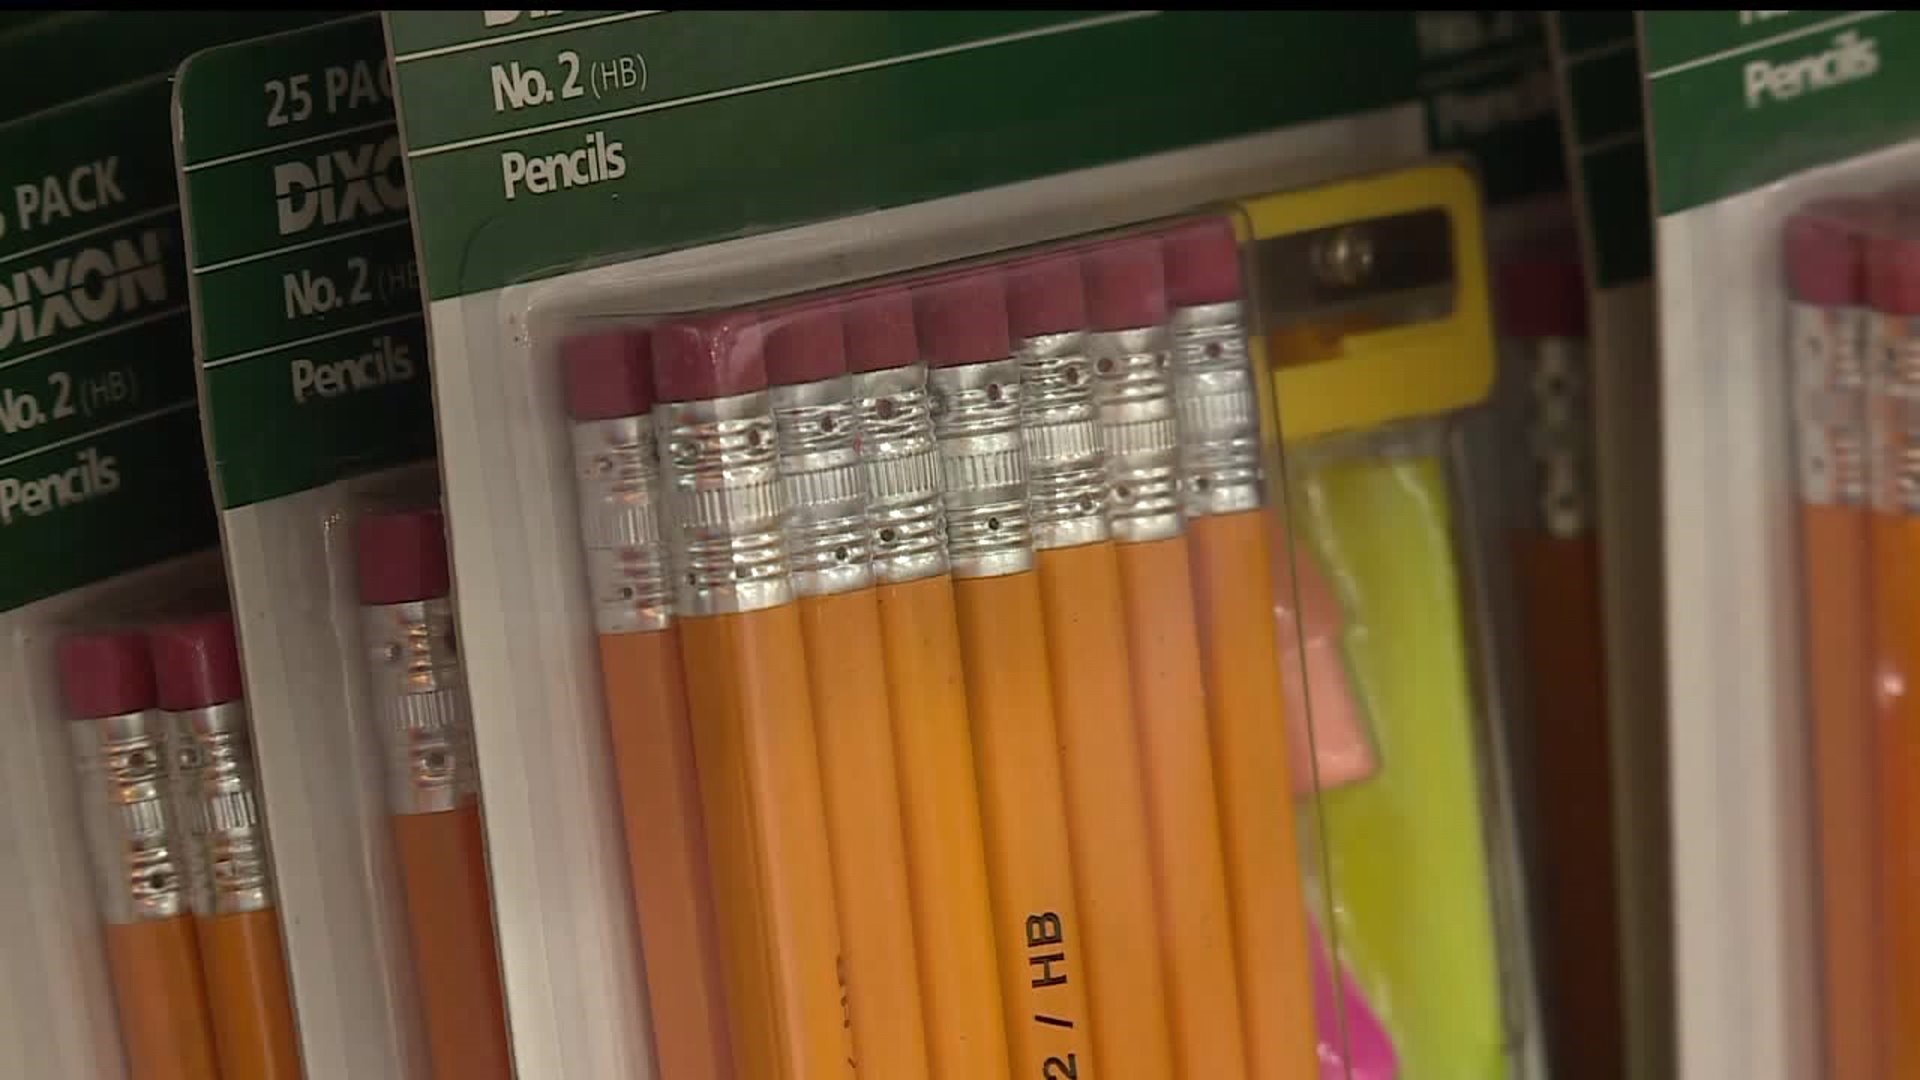 Operation Homefront collecting back-to-school supplies at Dollar Tree, last day to donate